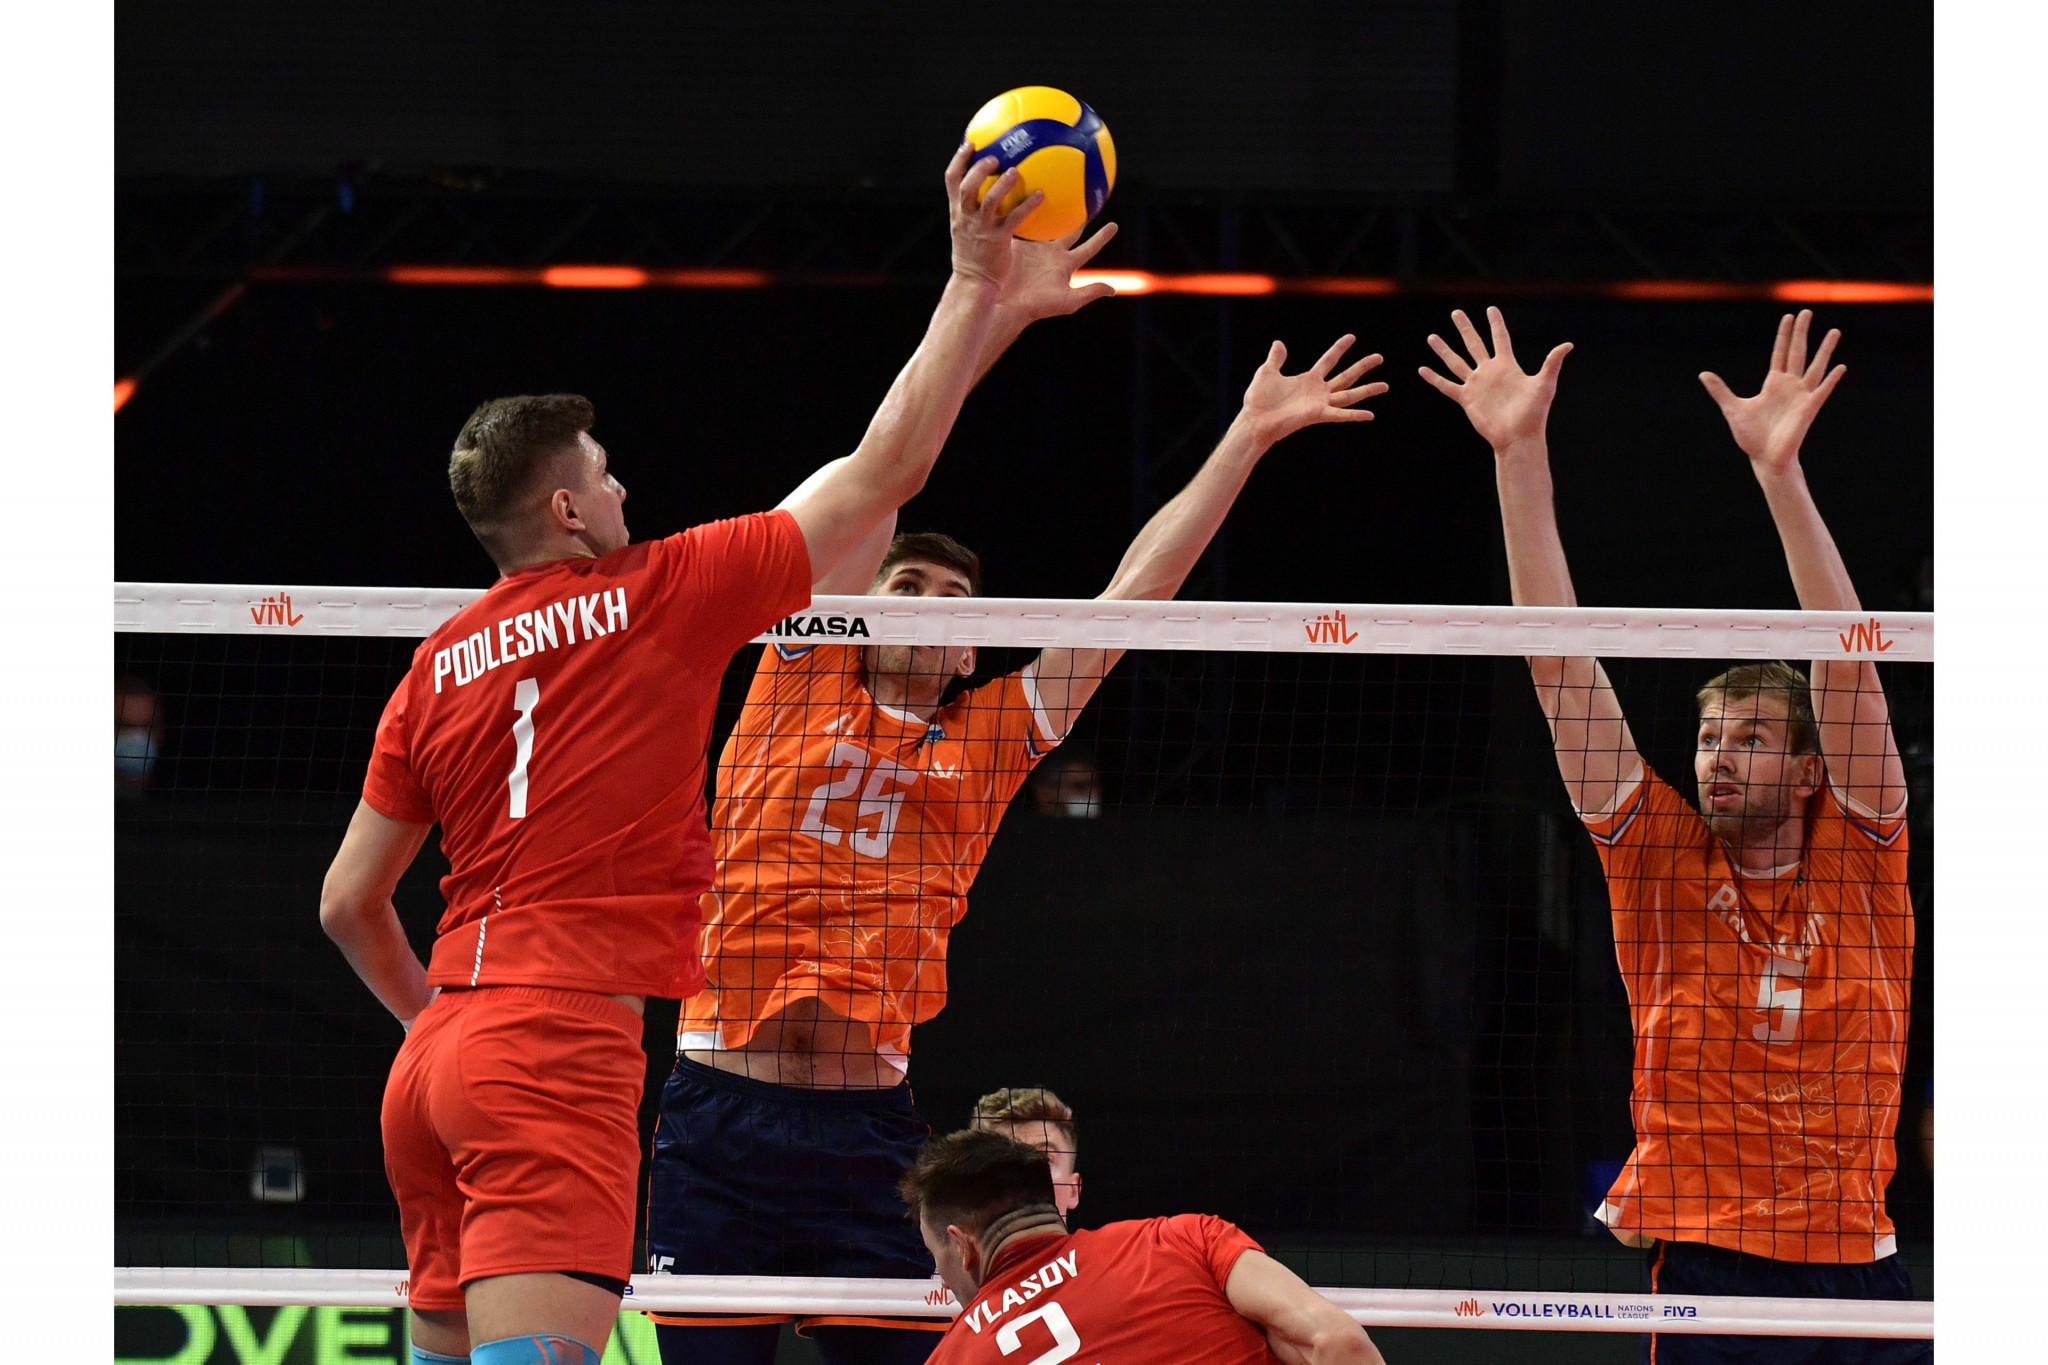 Russia, playing in red, are one of five unbeaten countries after the second day of men's matches in the Volleyball Nations League ©Volleyball World